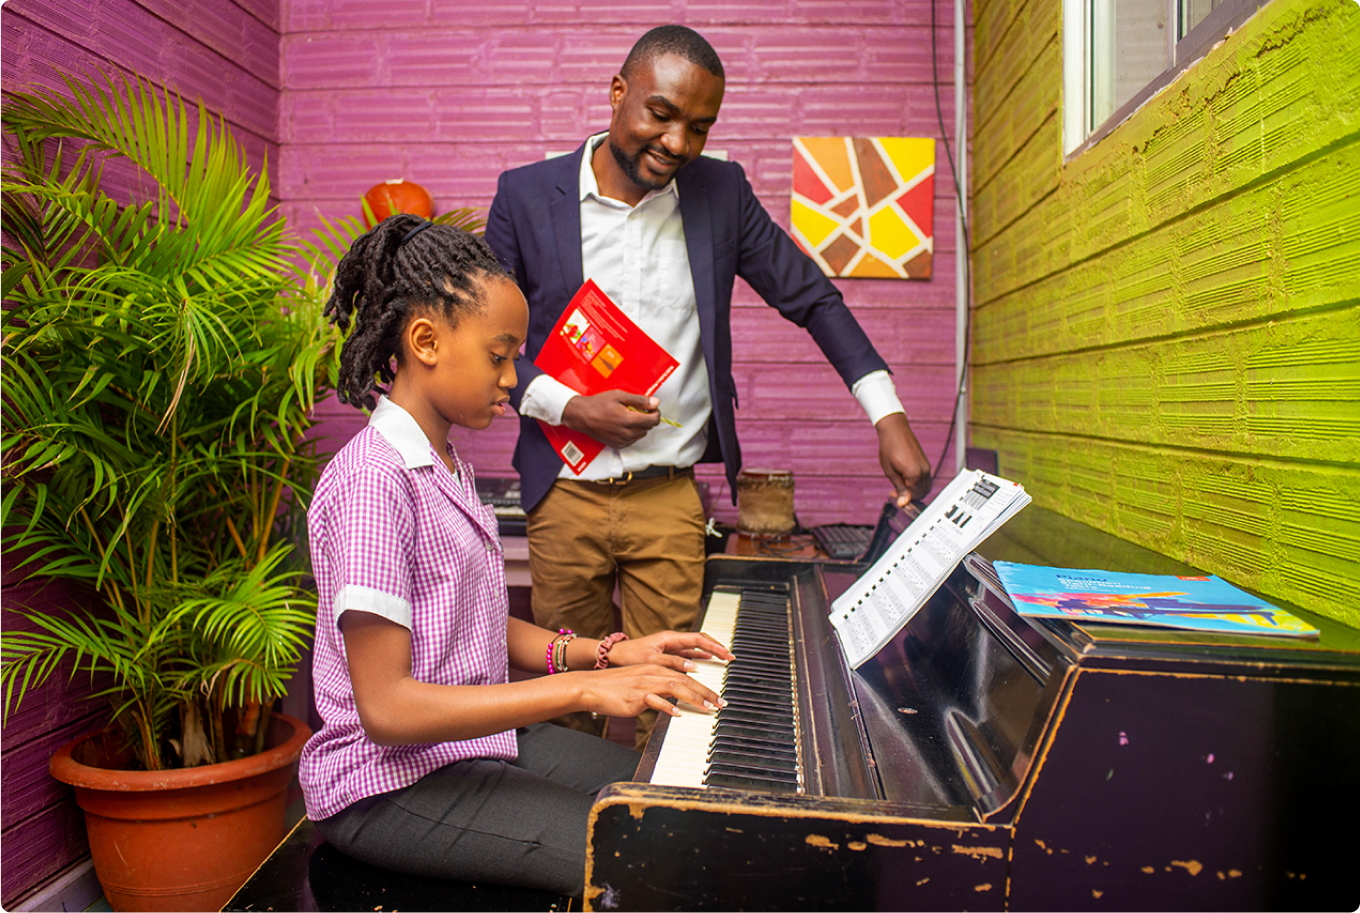 Riara primary school teacher teaching pupil how to play on keyboard